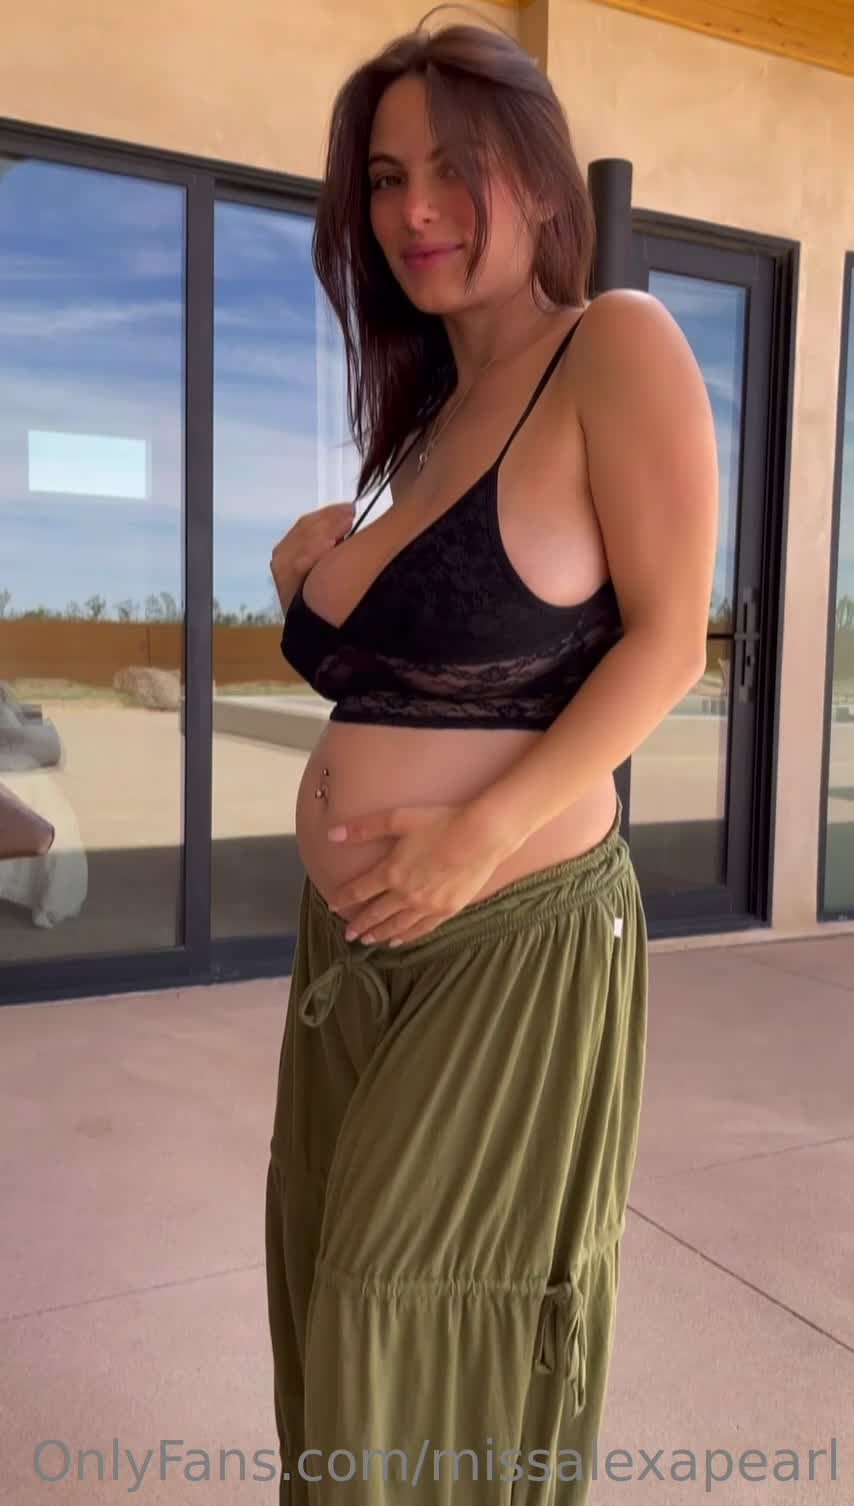 Shared Video by Pornplug with the username @Pornplug, who is a verified user,  April 7, 2024 at 12:01 PM. The post is about the topic Preggo Beauties and the text says '#Pregnant'